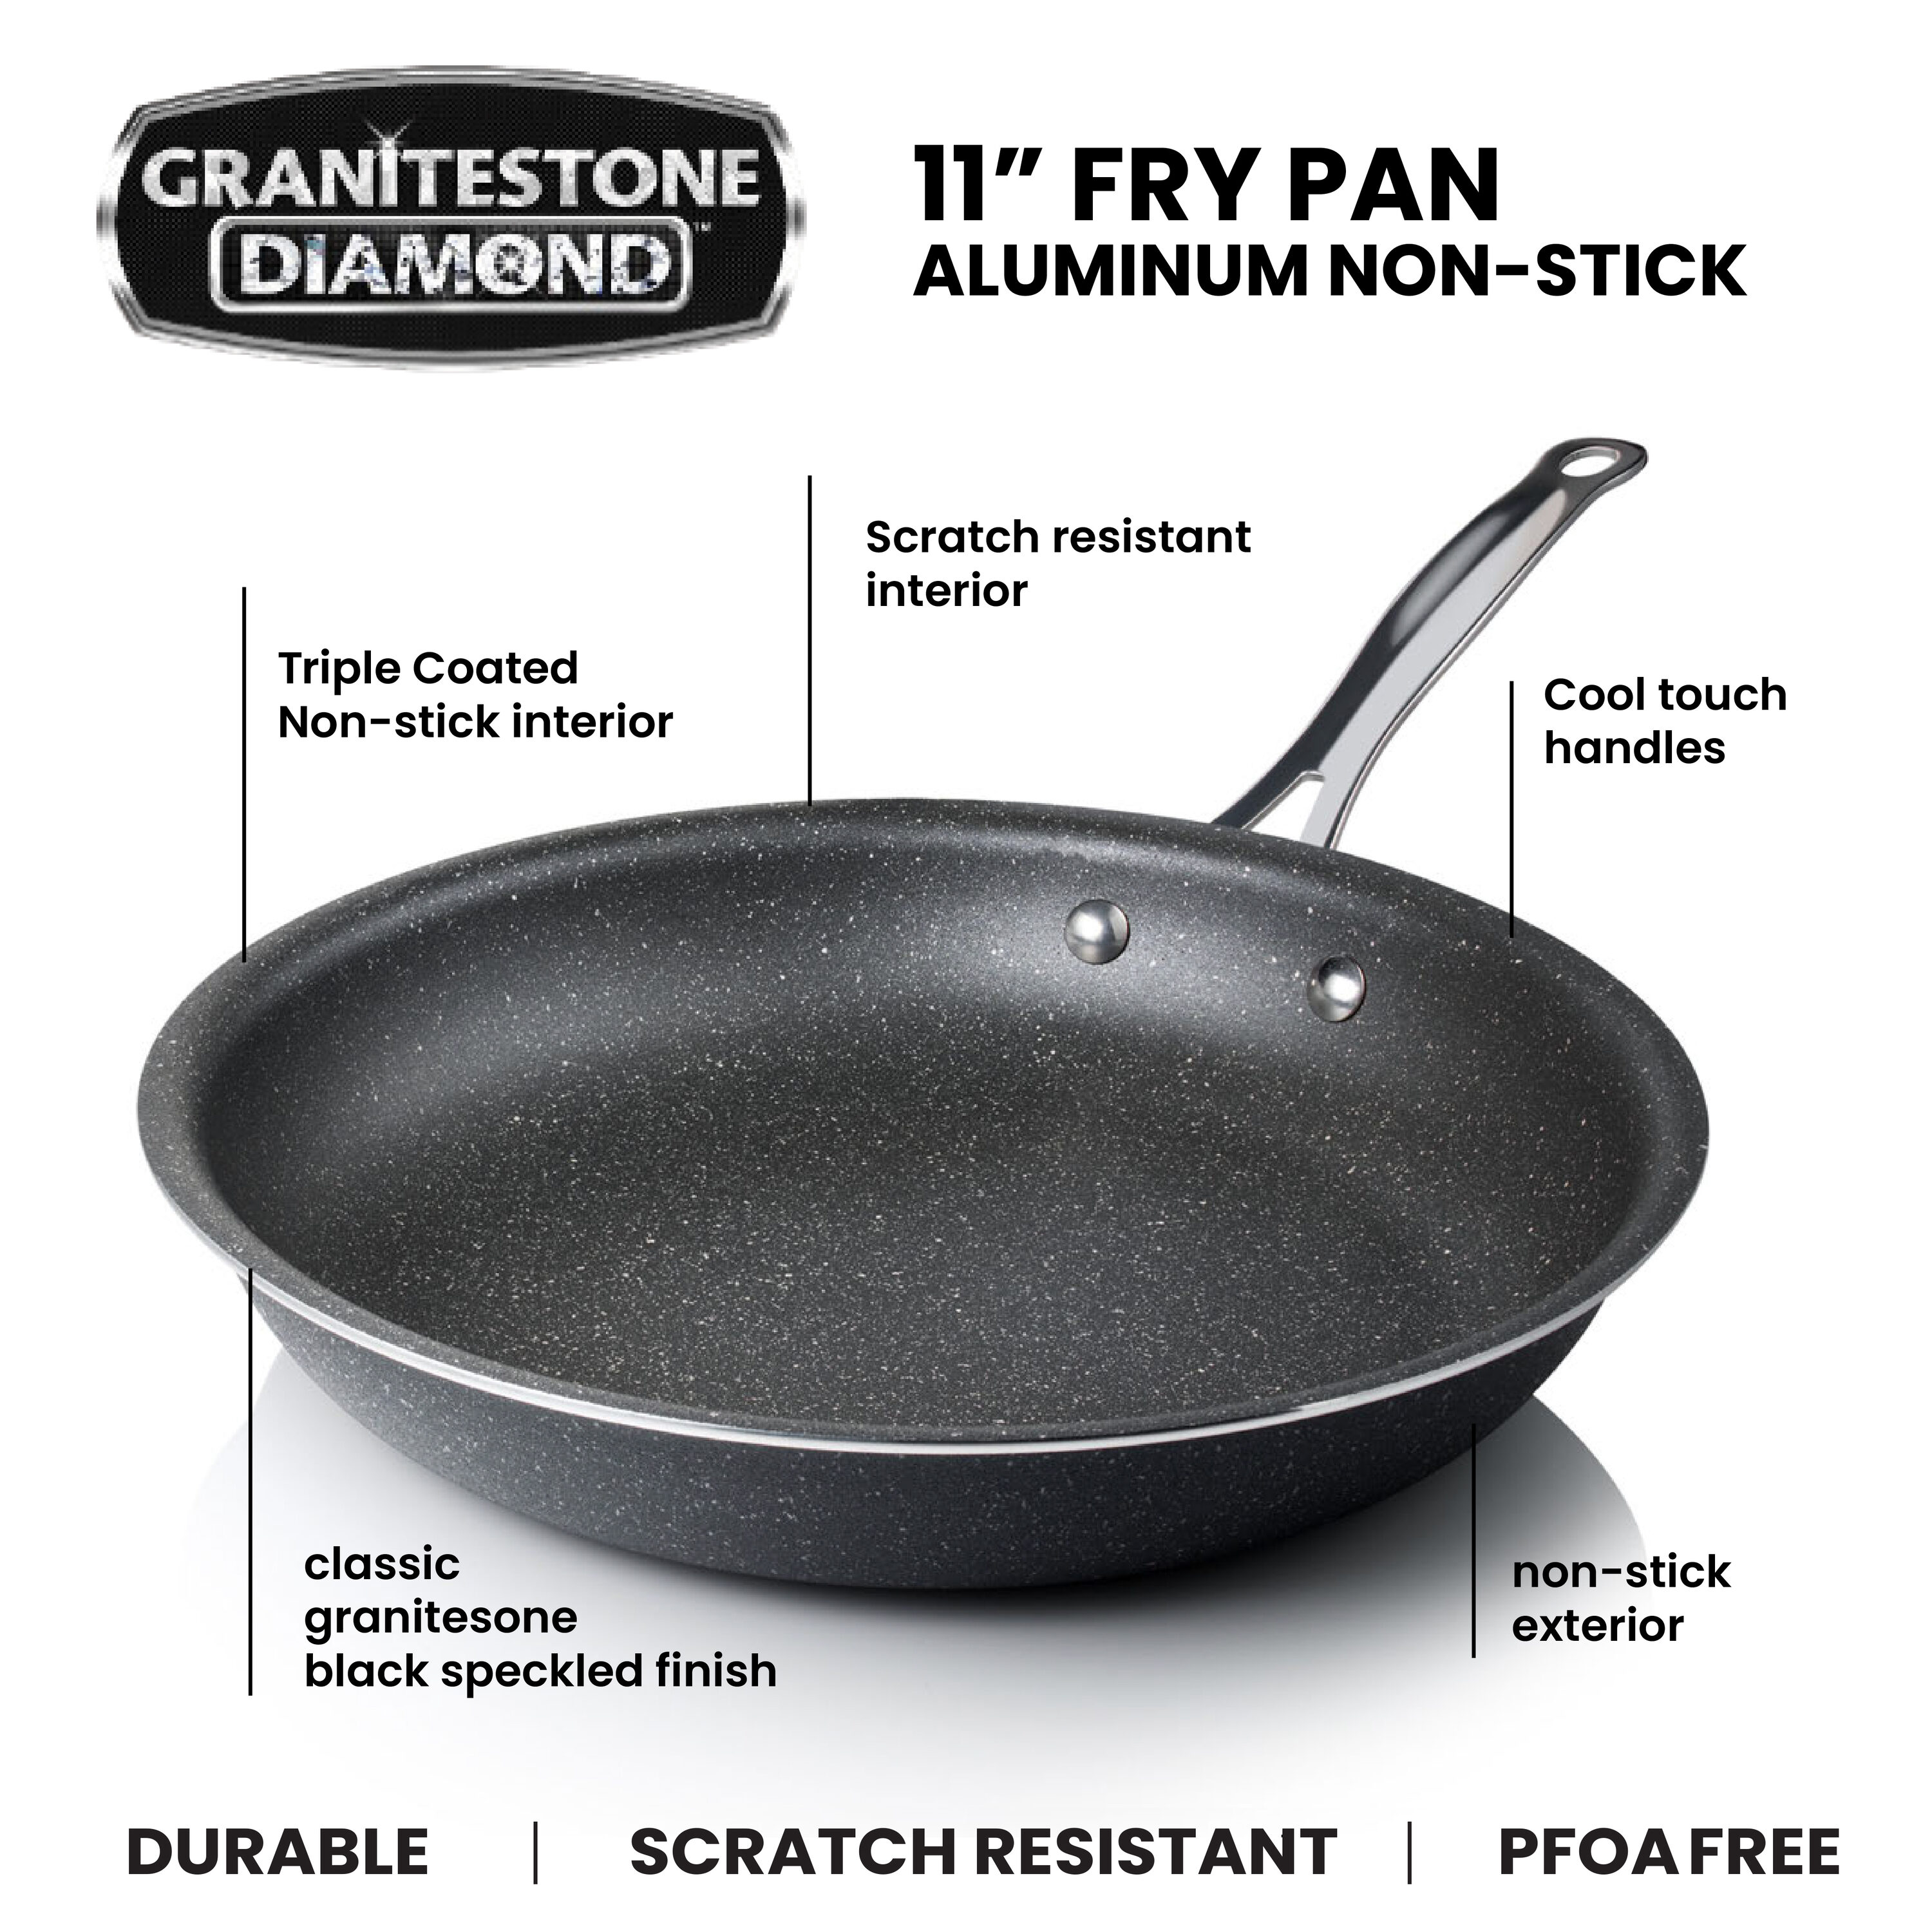 Granitestone 14 Inch Frying Pan with Lid, Large Non Stick Skillet for  Cooking, Frying Pans Nonstick, Ultra Durable Mineral and Diamond Coating,  Family